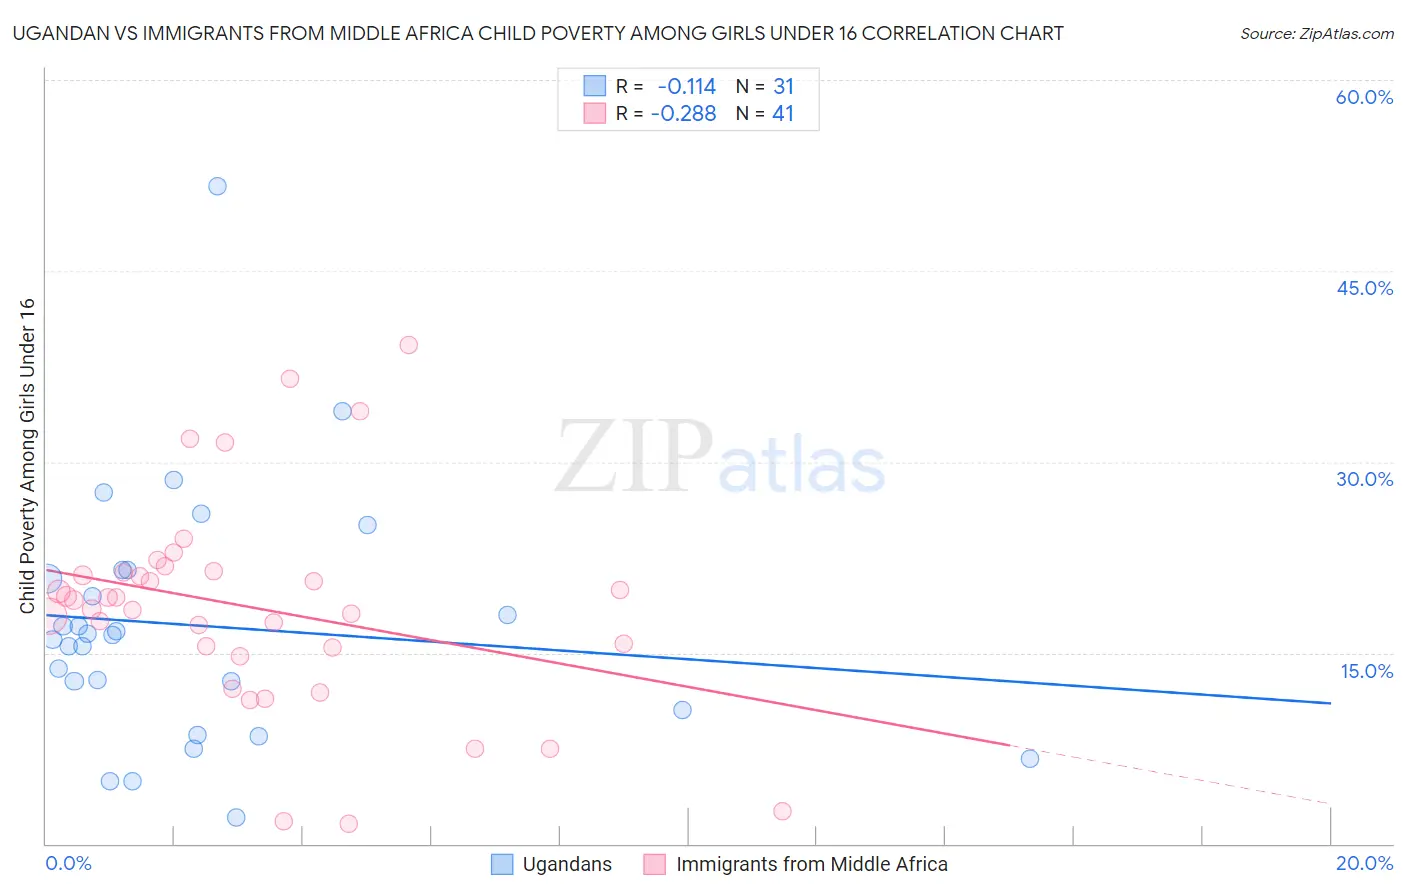 Ugandan vs Immigrants from Middle Africa Child Poverty Among Girls Under 16